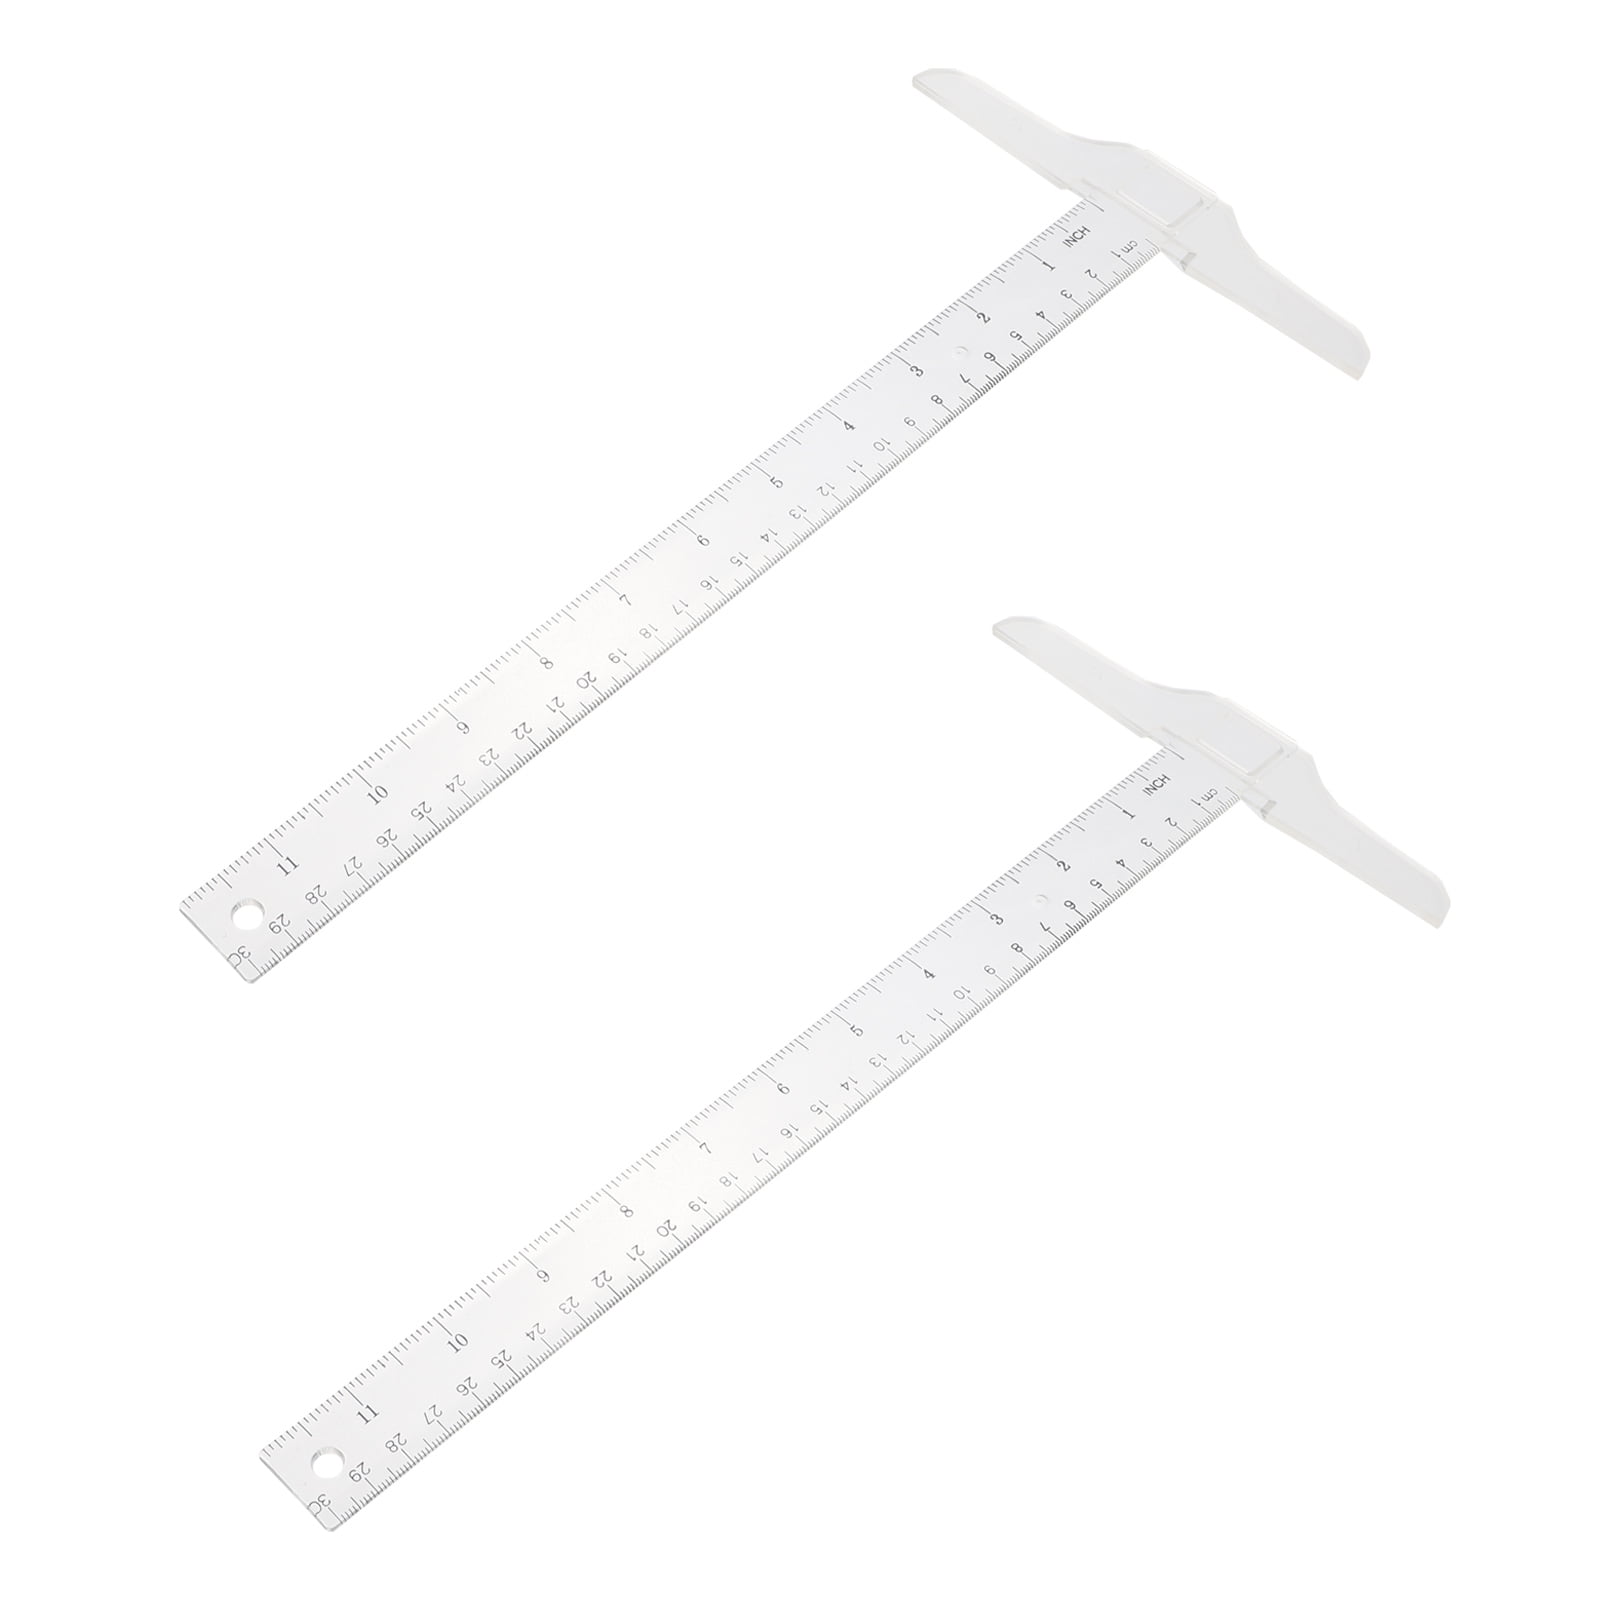 Woodworking Scriber T-Square Ruler 24 inch, Wihxd Aluminum T-Square Ruler  for Woodworking, Architect Ruler for Carpenter Layout and Measuring Tools